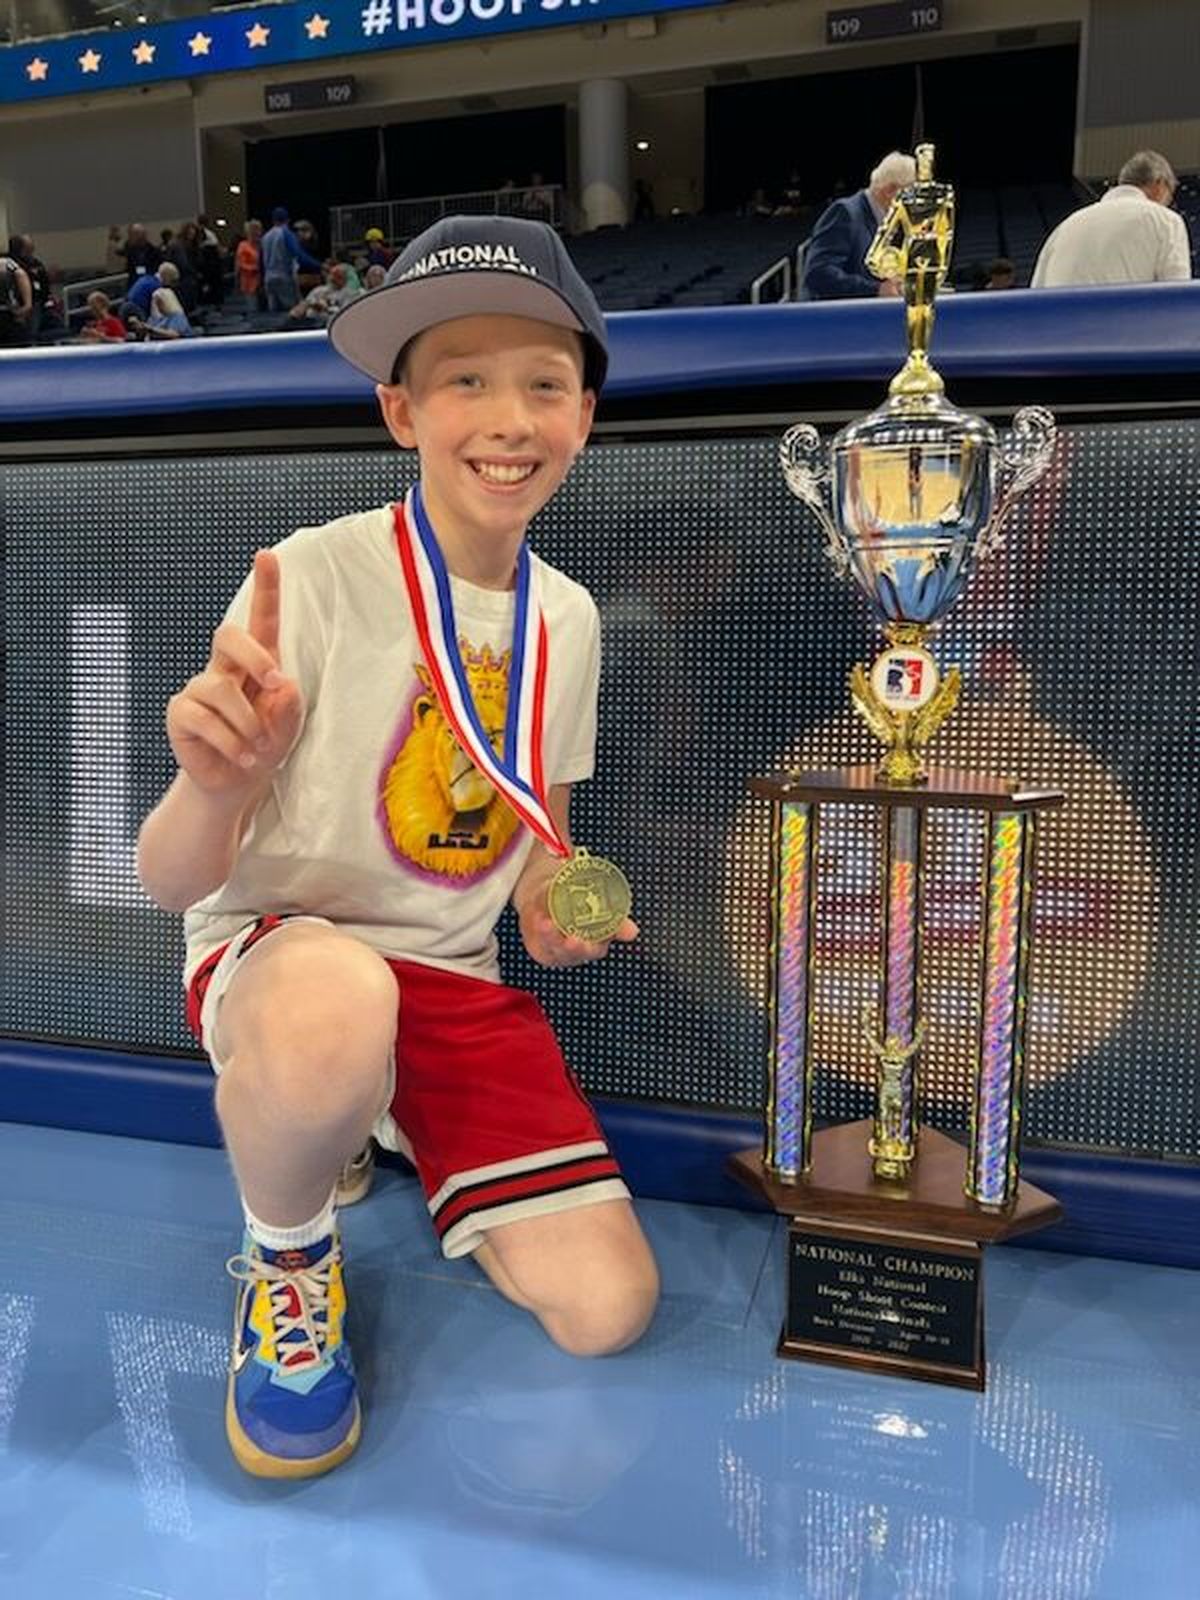 Madox Hodges poses after winning the Elks Lodge Hoop Shoot national free throw championship in Chicago.  (Courtesy Joe Hodges)